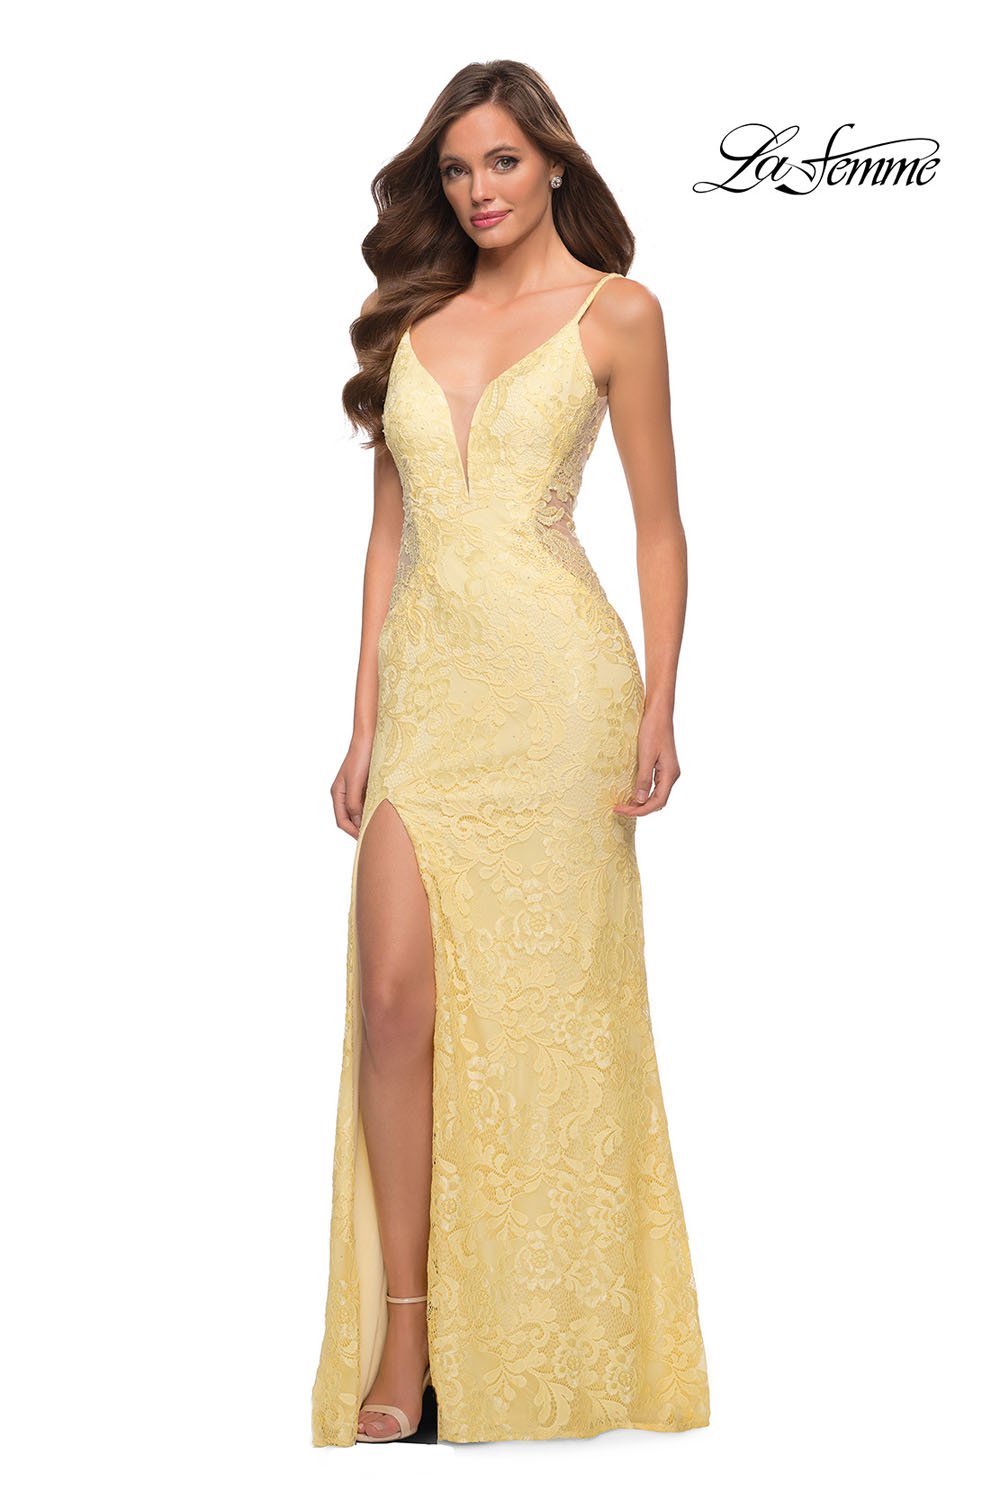 La Femme 29679 dress images in these colors: Dark Berry, Navy, Pale Yellow.